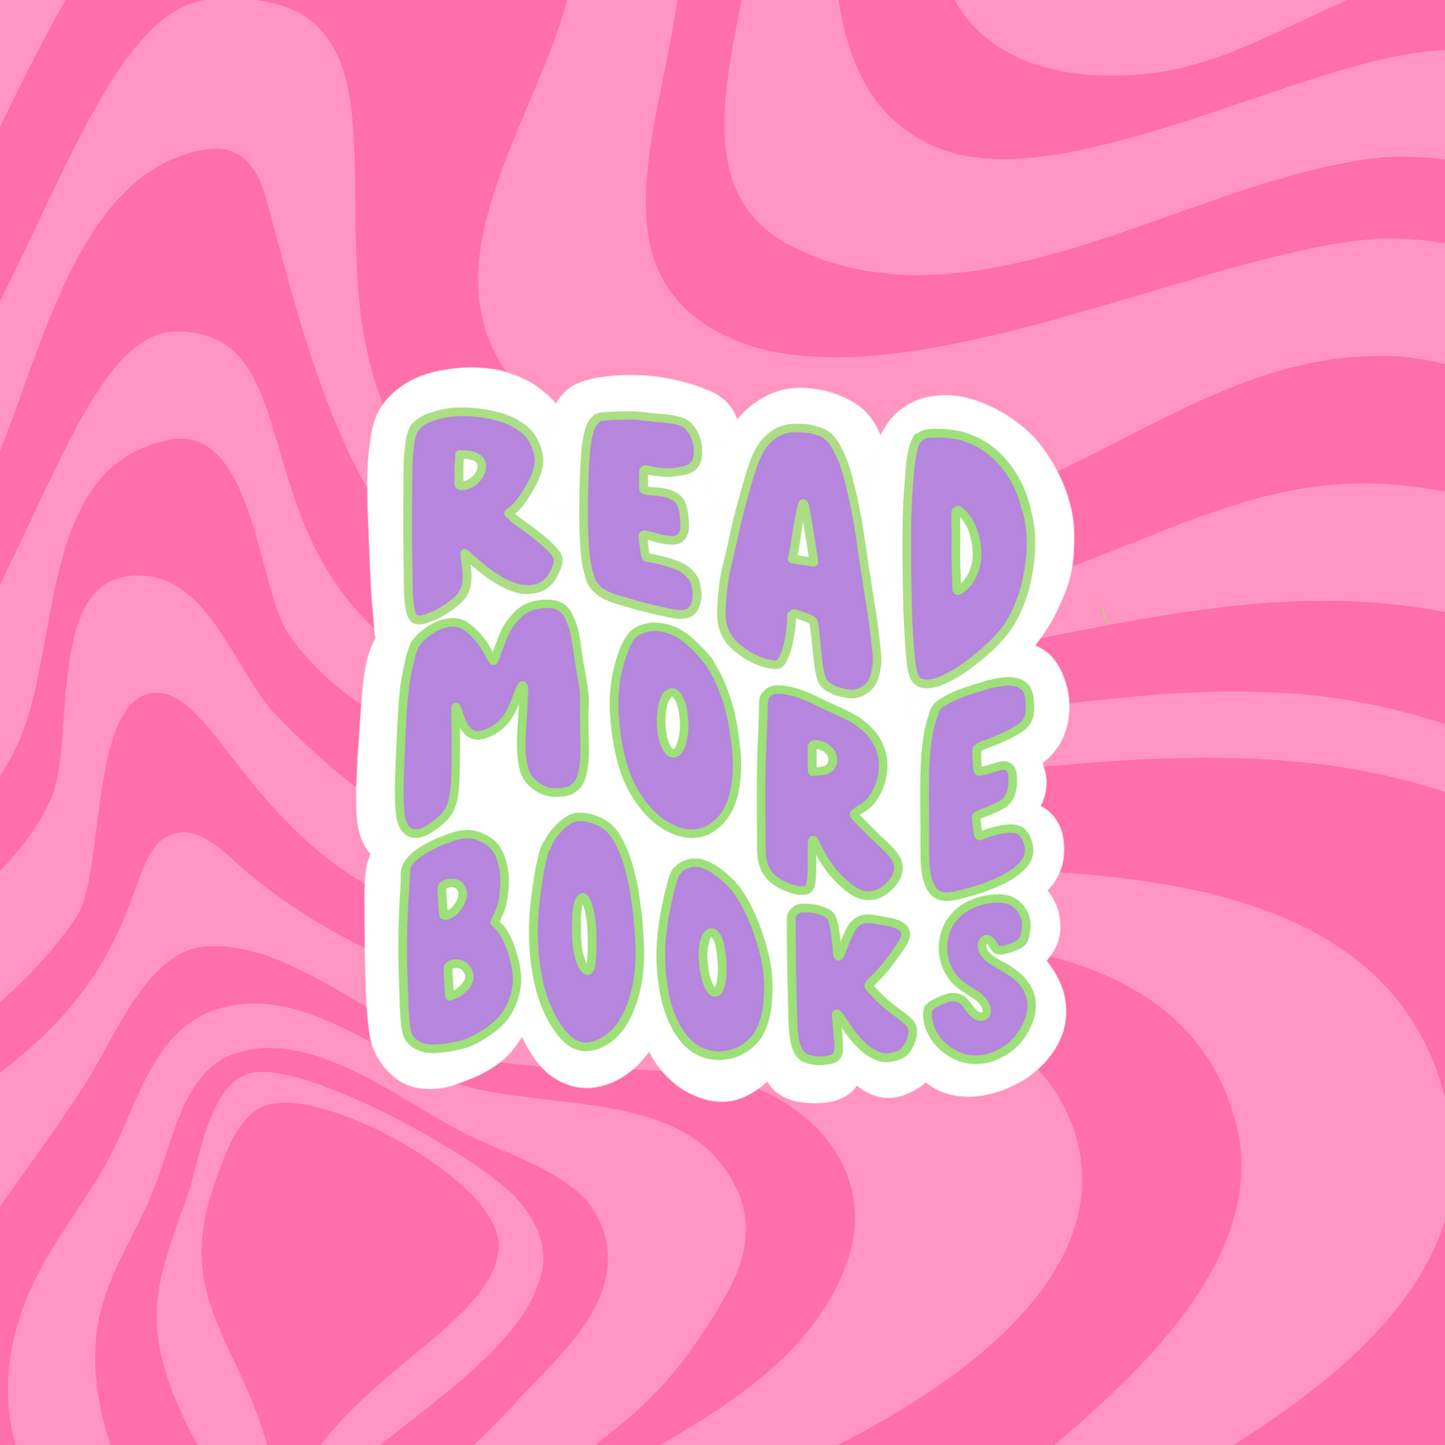 Read More Books | Hot Girls Read